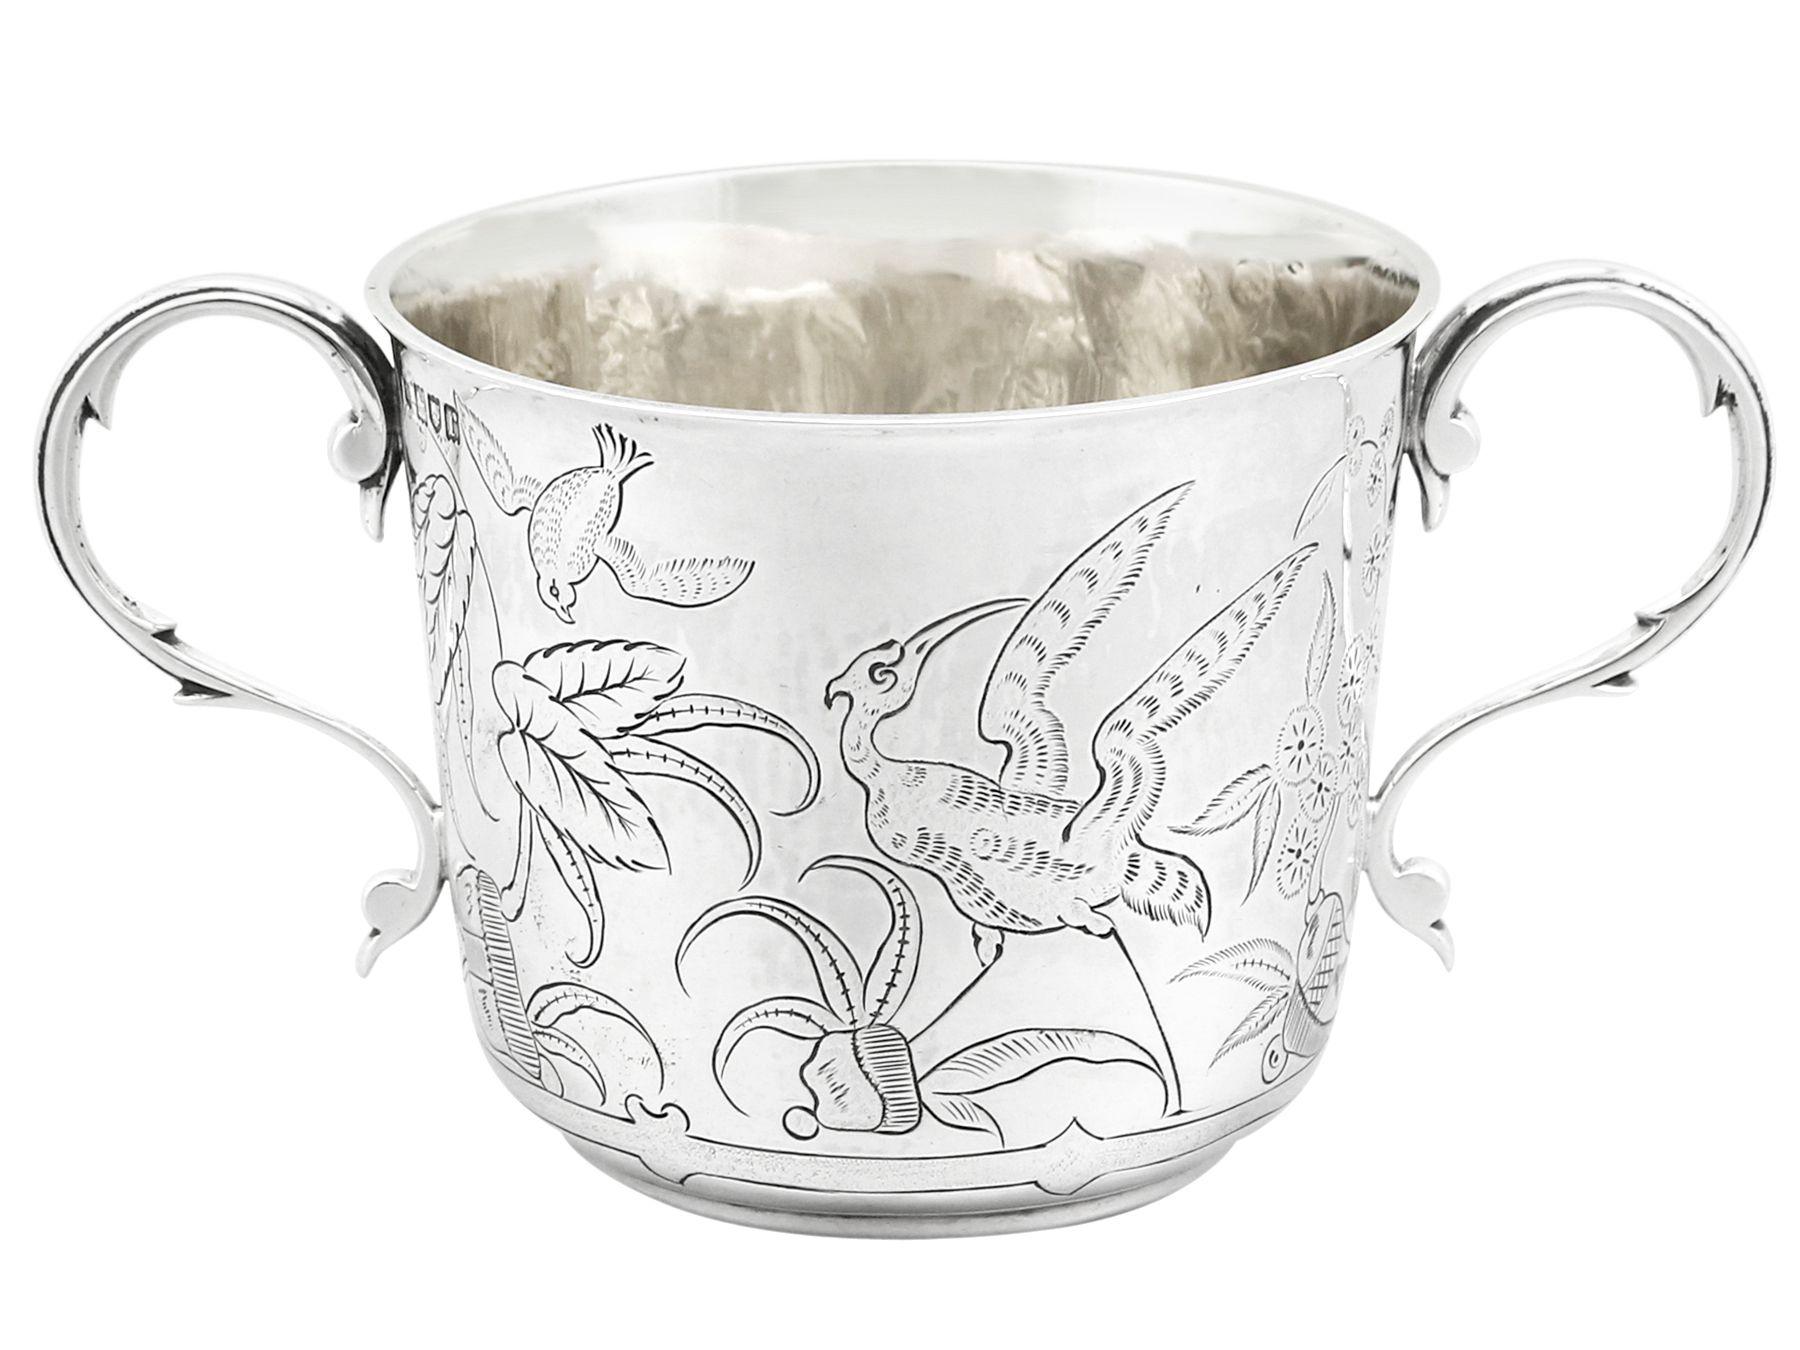 An exceptional, fine and impressive antique George V English sterling silver porringer made by Lambert & Co.

This exceptional antique George V sterling silver porringer has a plain inverted bell shaped form onto a collect base, all in the Classic